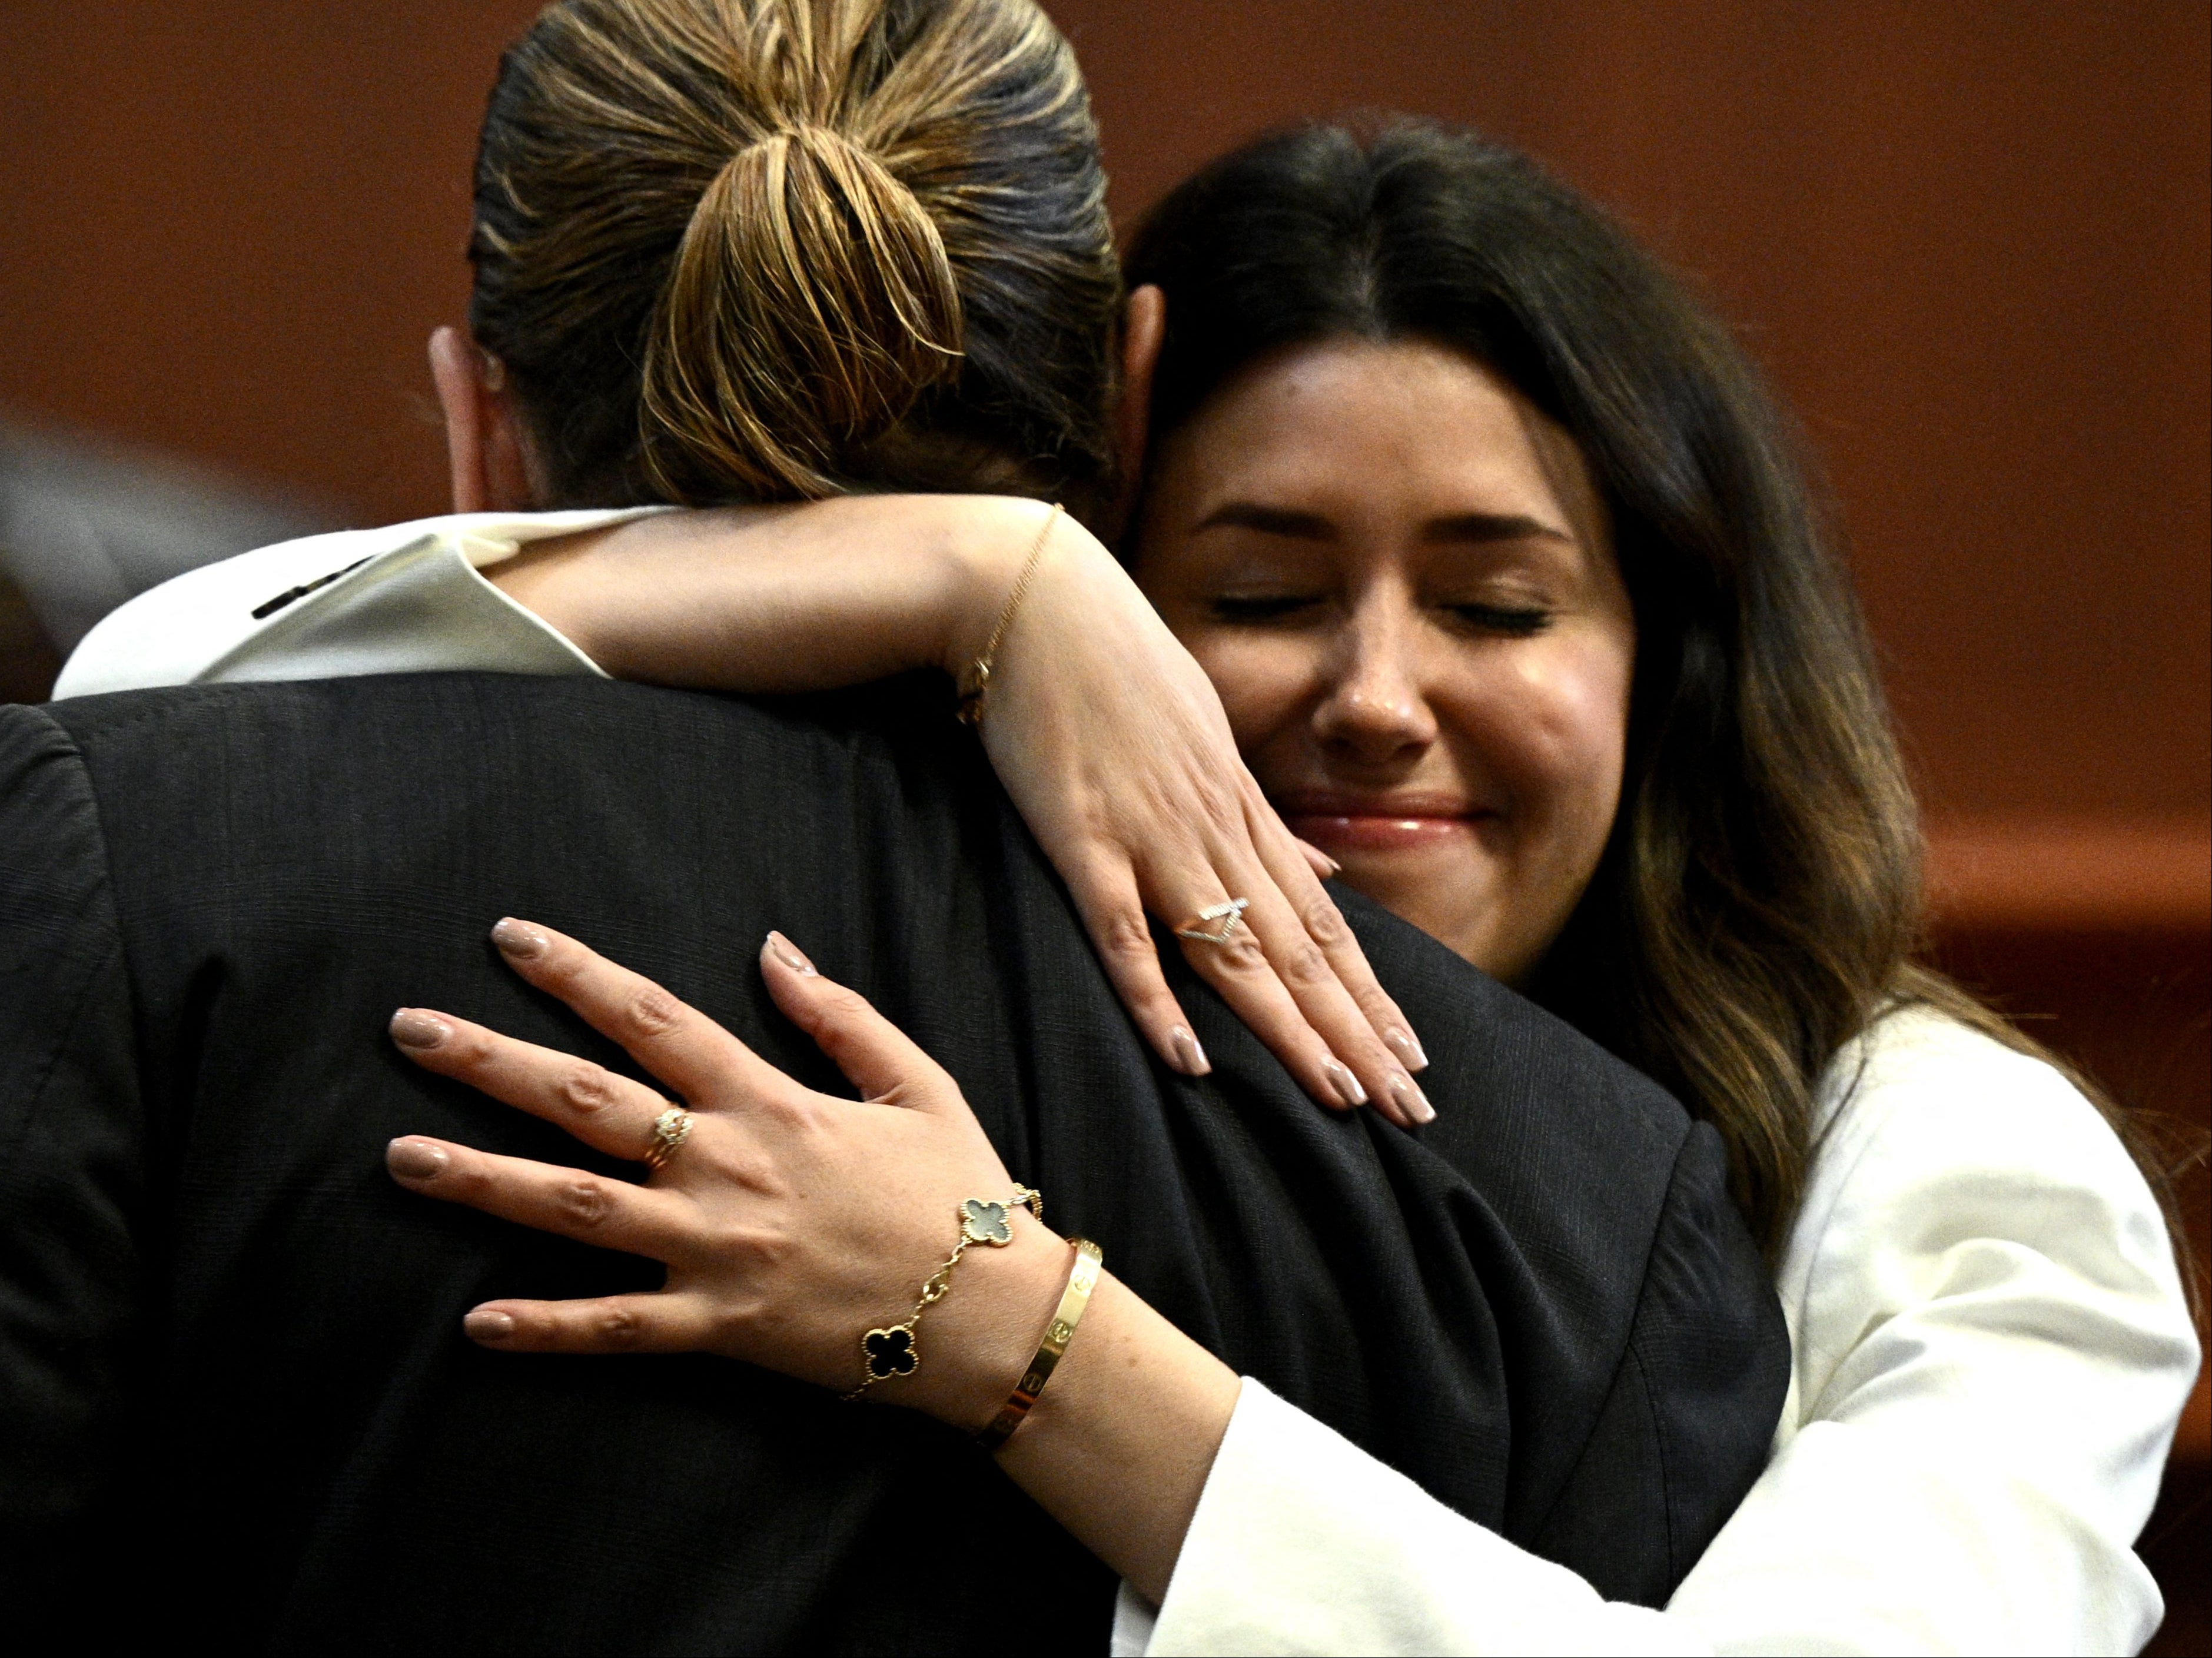 Attorney Camille Vasquez embraces actor Johnny Depp in a courtroom at the Fairfax County Courthouse in Fairfax, Virginia, on 17 May 2022